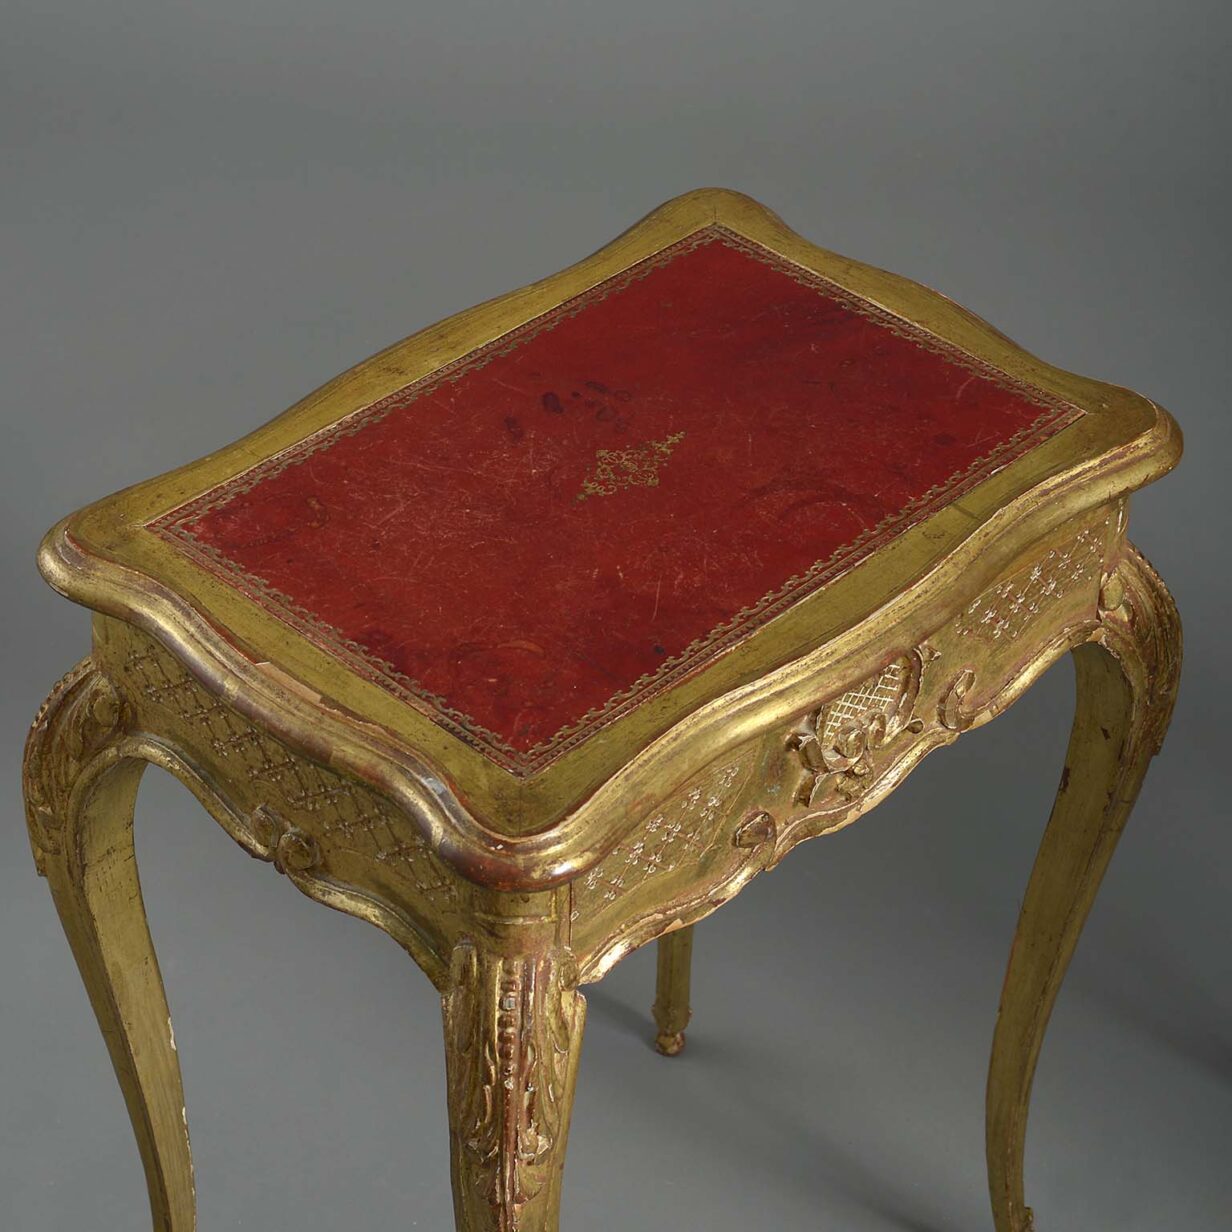 Pair of giltwood tables